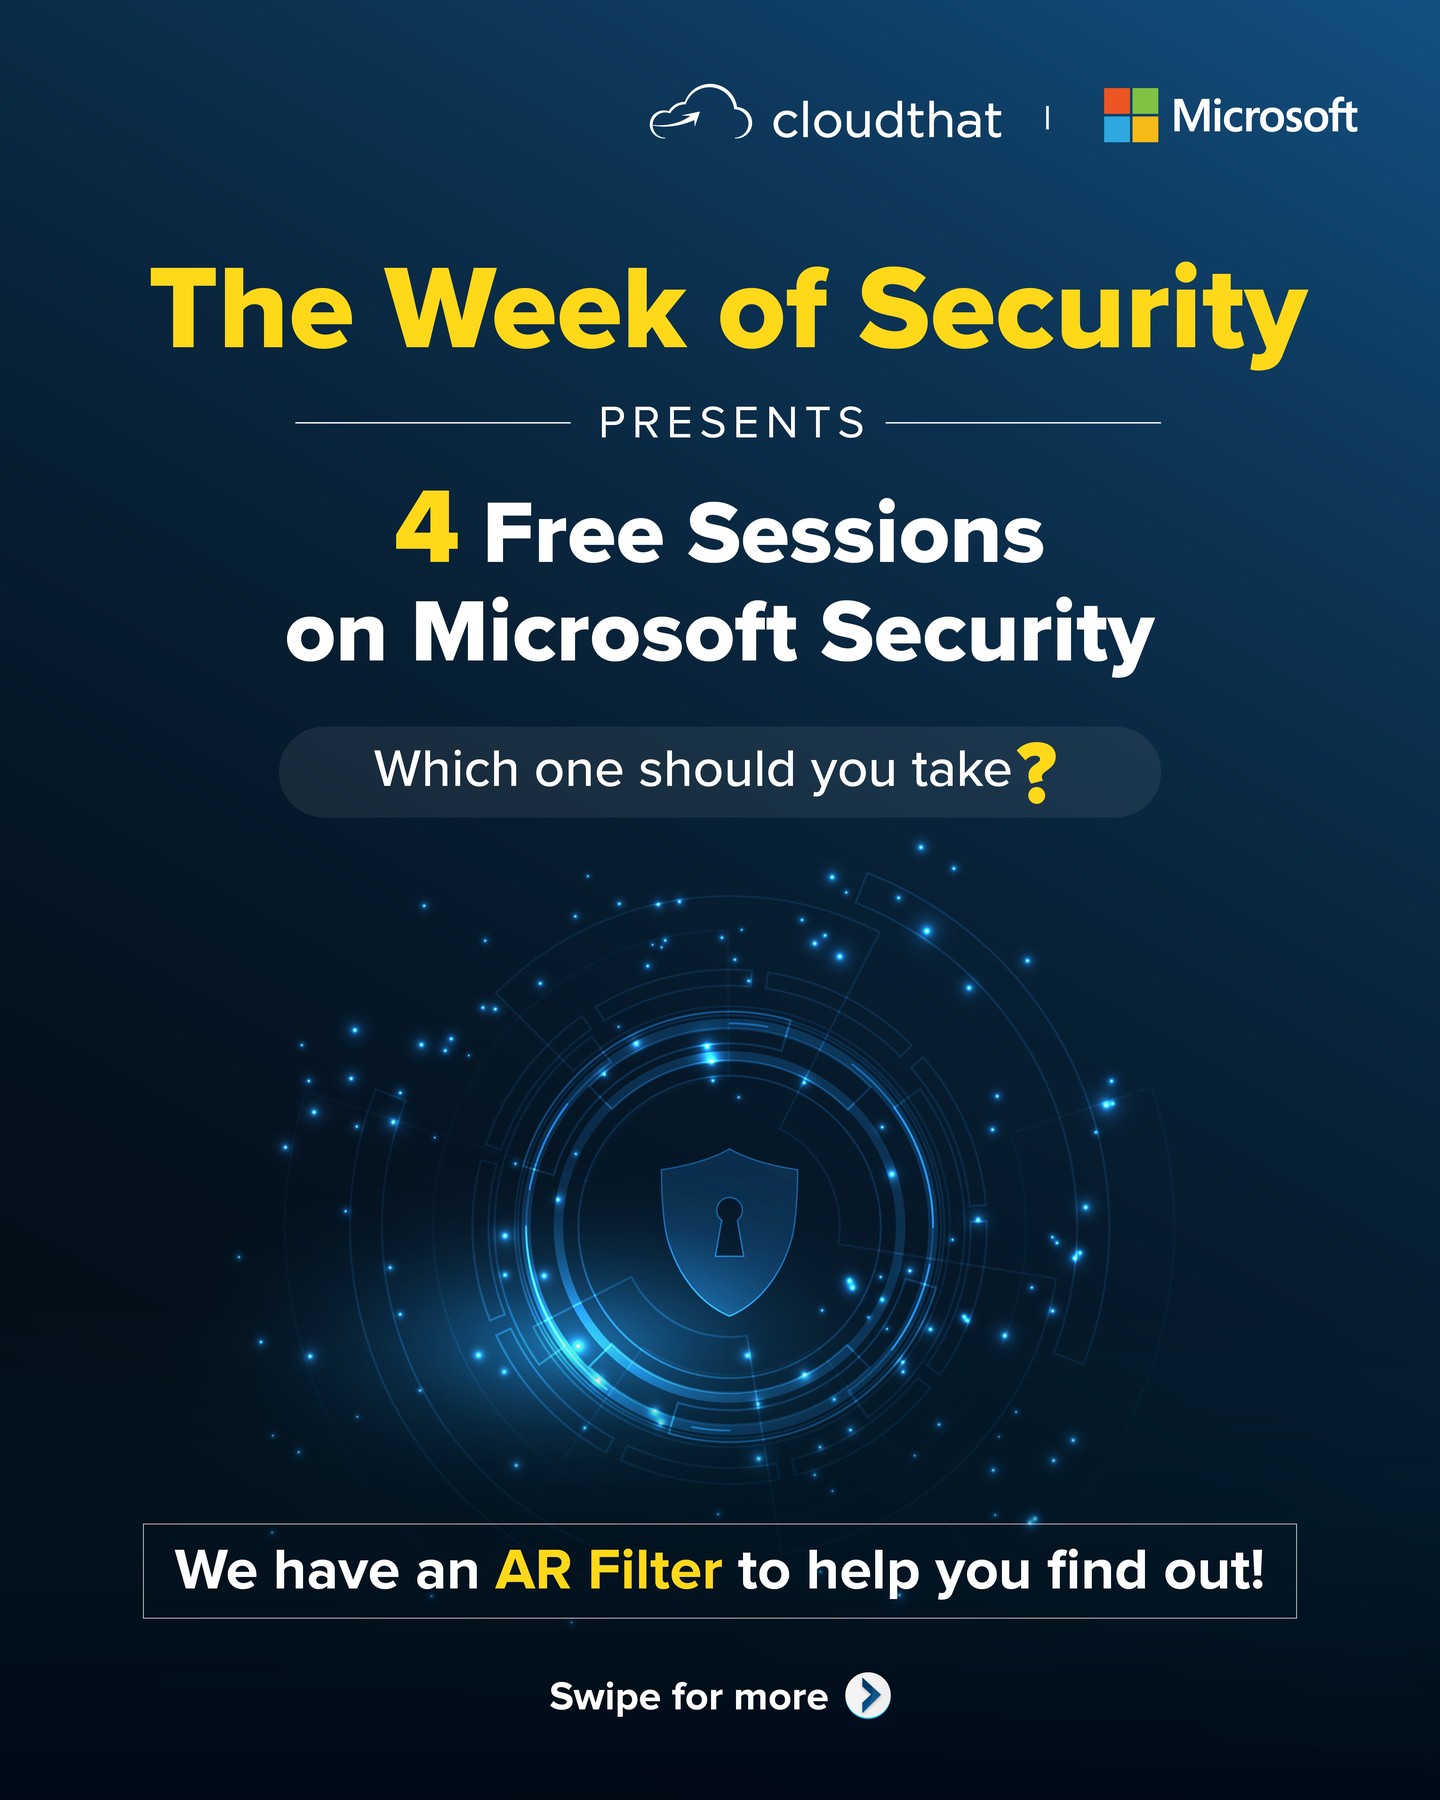 Want to be a part of @microsoft's Week of Security but confused about which session to opt for? Don't worry! Our newest AR filter can help you find out. Just follow the rules, click, and DM us that picture. But that's not all; we'll send you the link to the free training of your choice. Sounds interesting? Participate now!

#microsoftsecurity #certified #arfilter #freetraining #cybersecurity